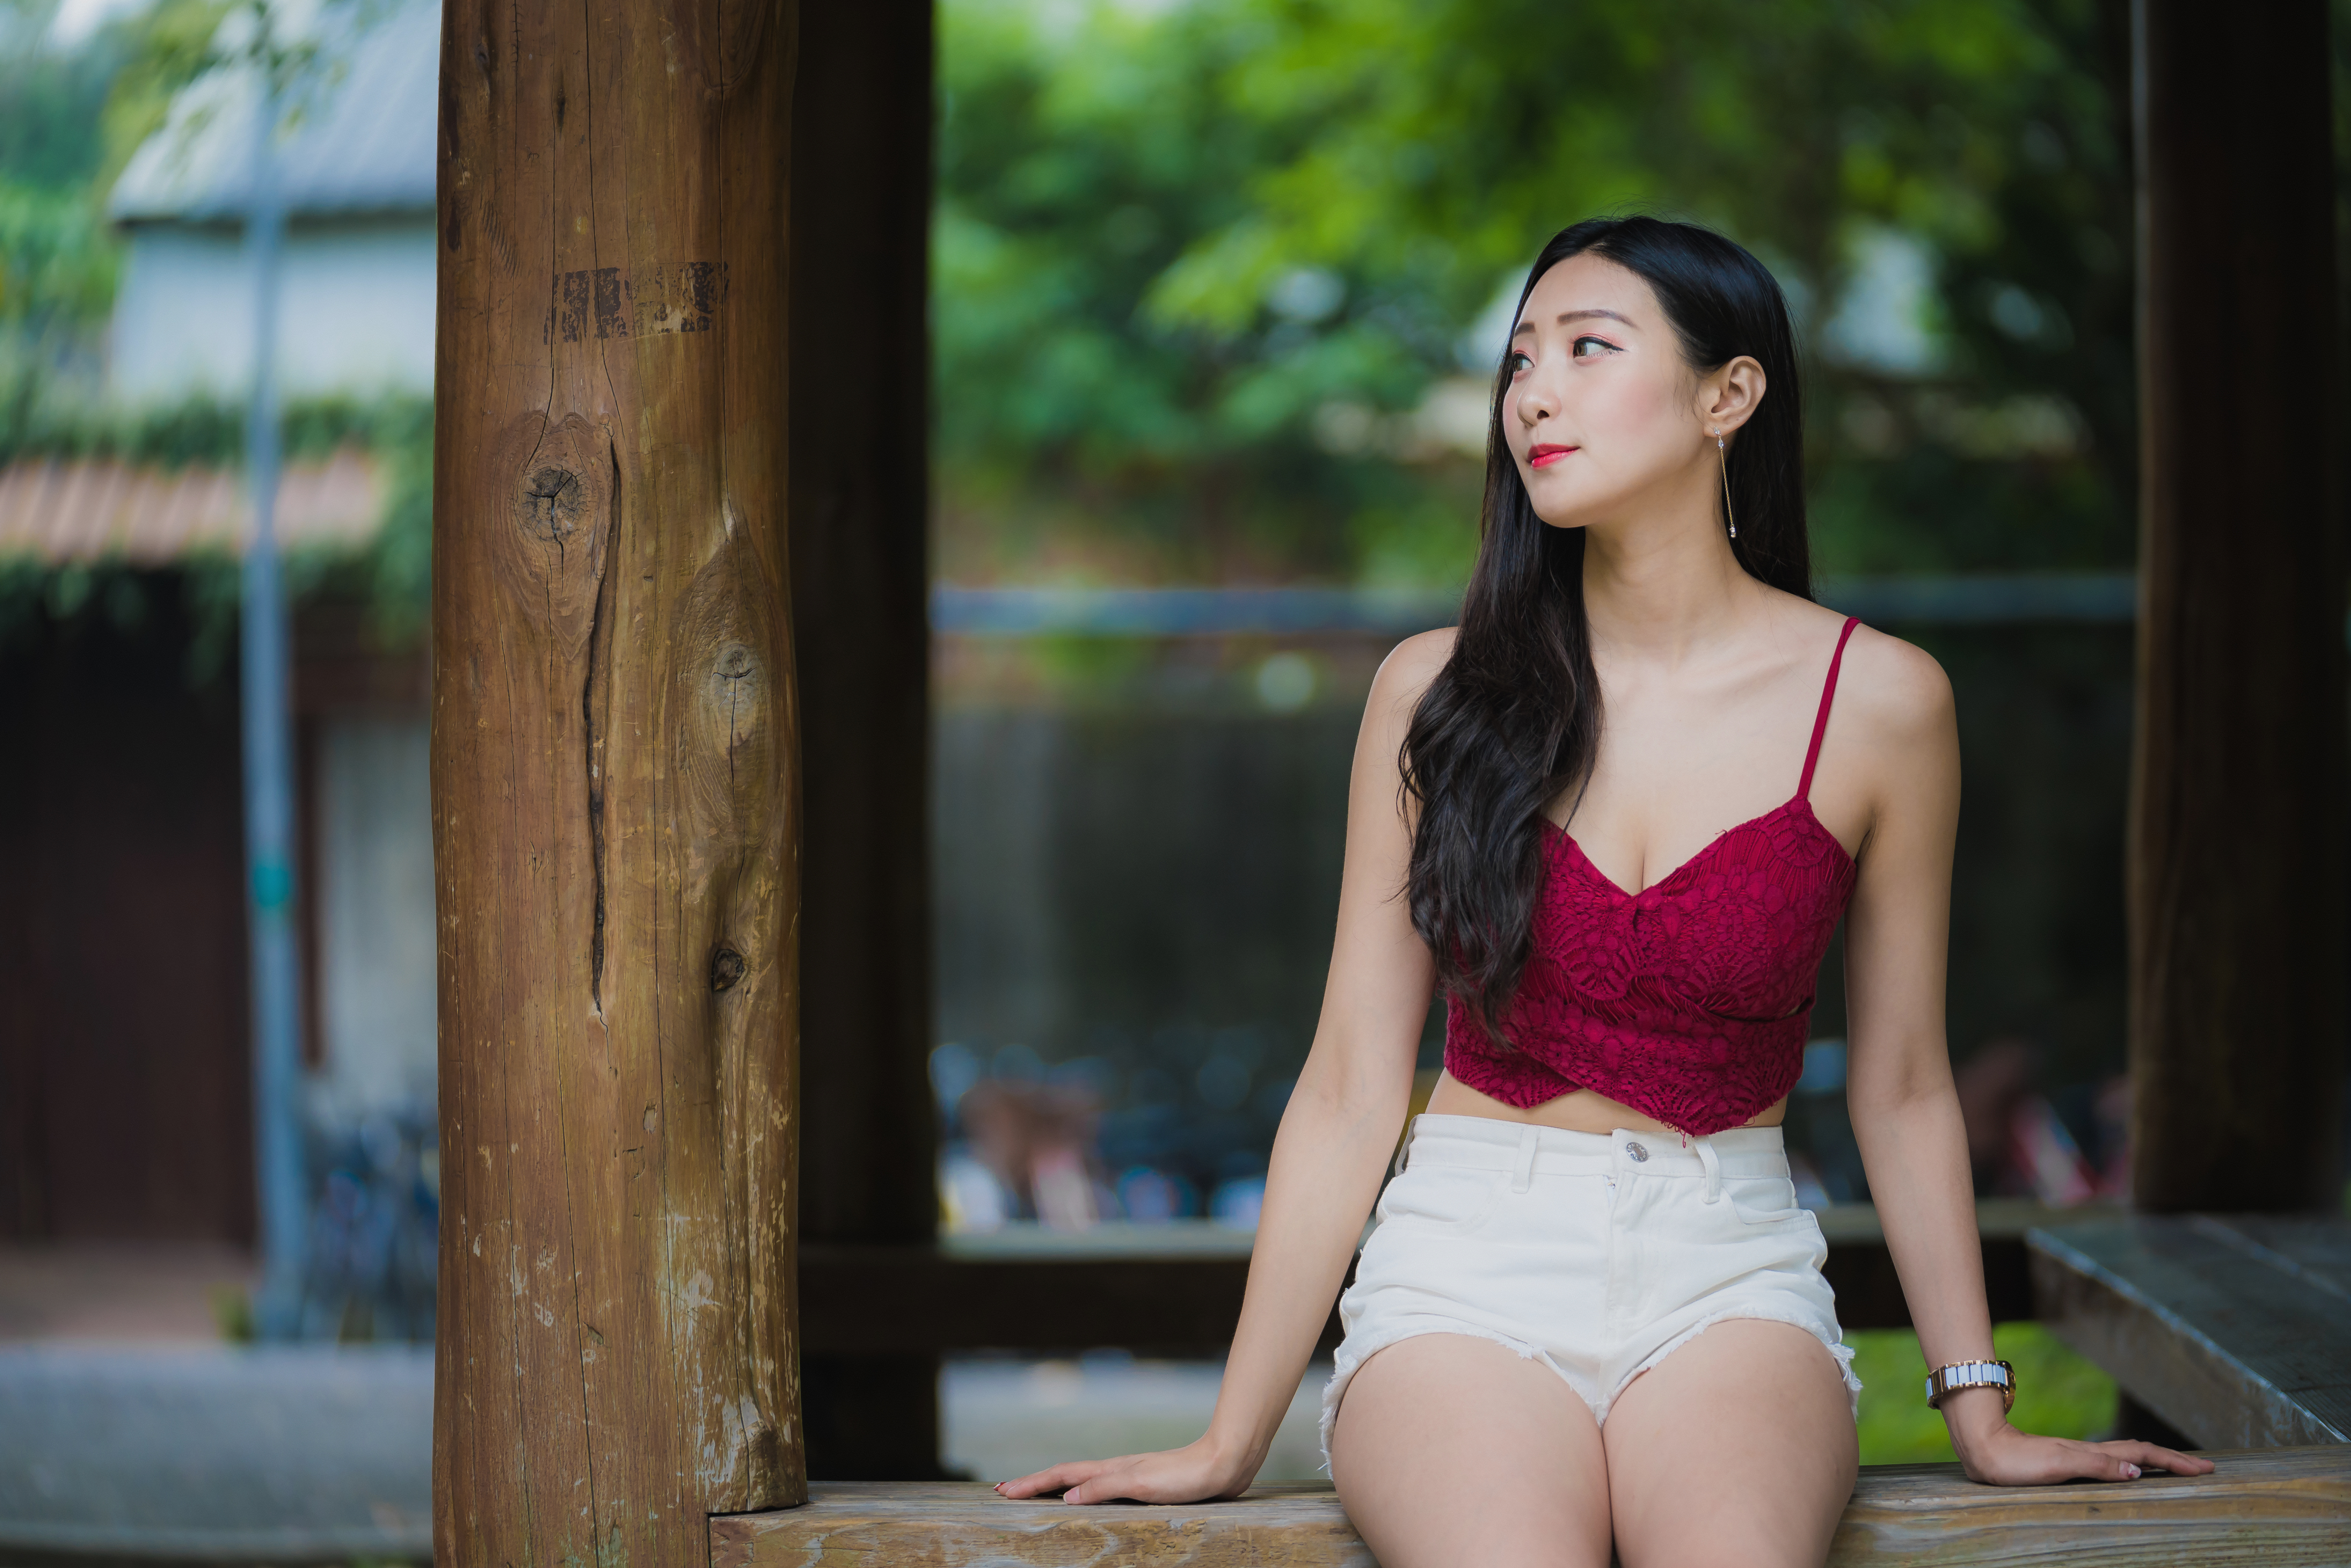 People 4500x3002 Asian women model brunette long hair looking away smiling tank top red tops cleavage jean shorts short shorts thighs depth of field log portrait sitting frontal view outdoors women outdoors watch red lipstick earring